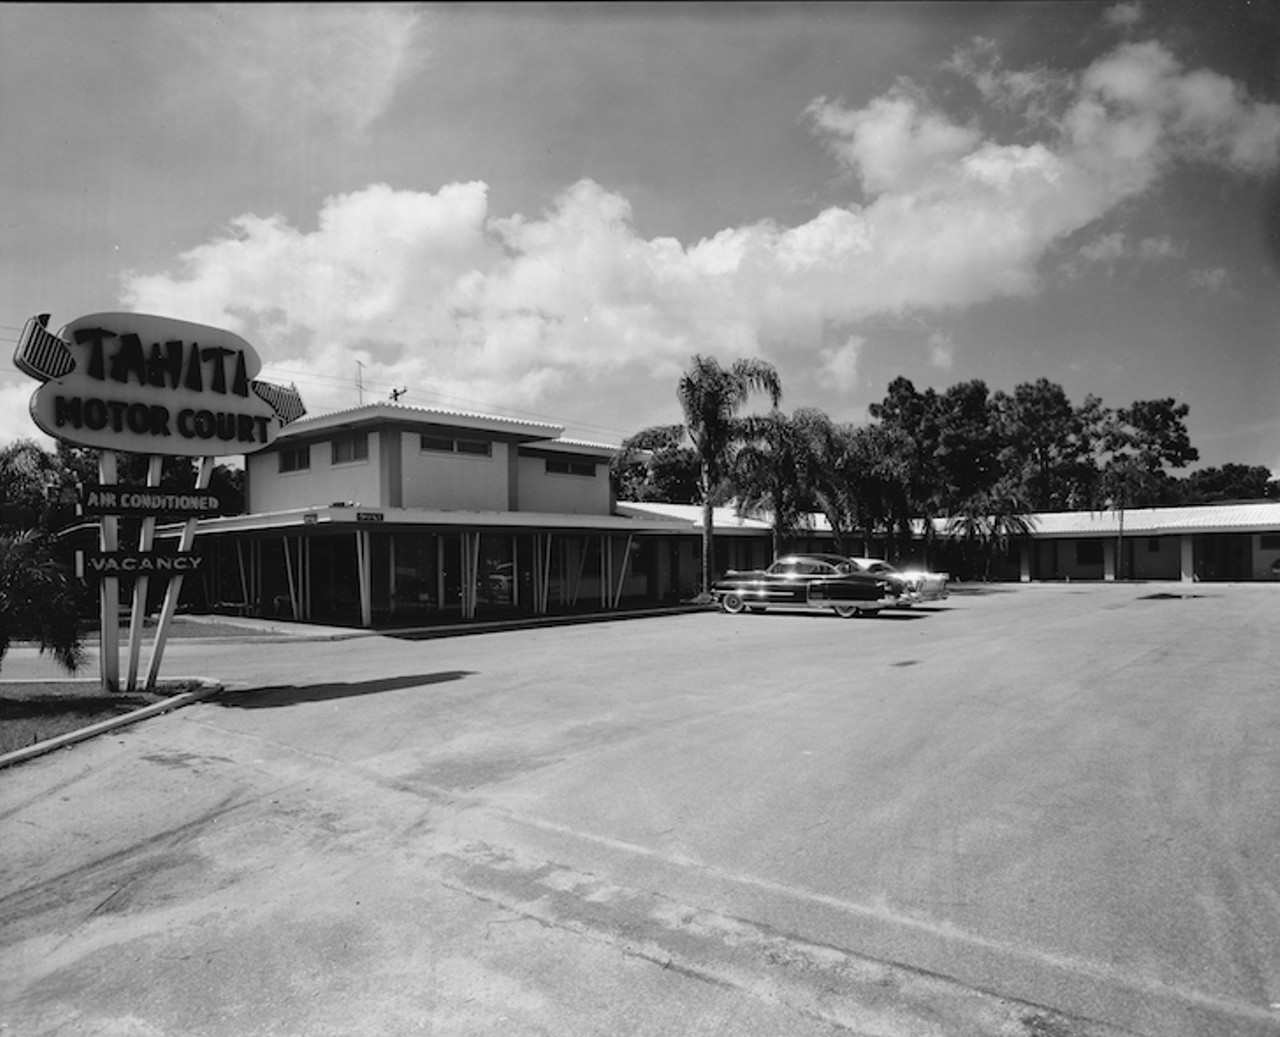 THEN
Tahiti Motor Court
601 South Dale Mabry Highway, 1958.
Tahiti Motor Court opened as a 17-room motel in 1954, welcoming guests to the growing South Tampa area. By 1961, the Tahiti Court transitioned from its original L-shaped structure to a 42-room facility with a pool, a 2-story wing fronting Dale Ave, and a coffee lounge at the center. With that expansion, the owners changed the name to Tahitian Inn.